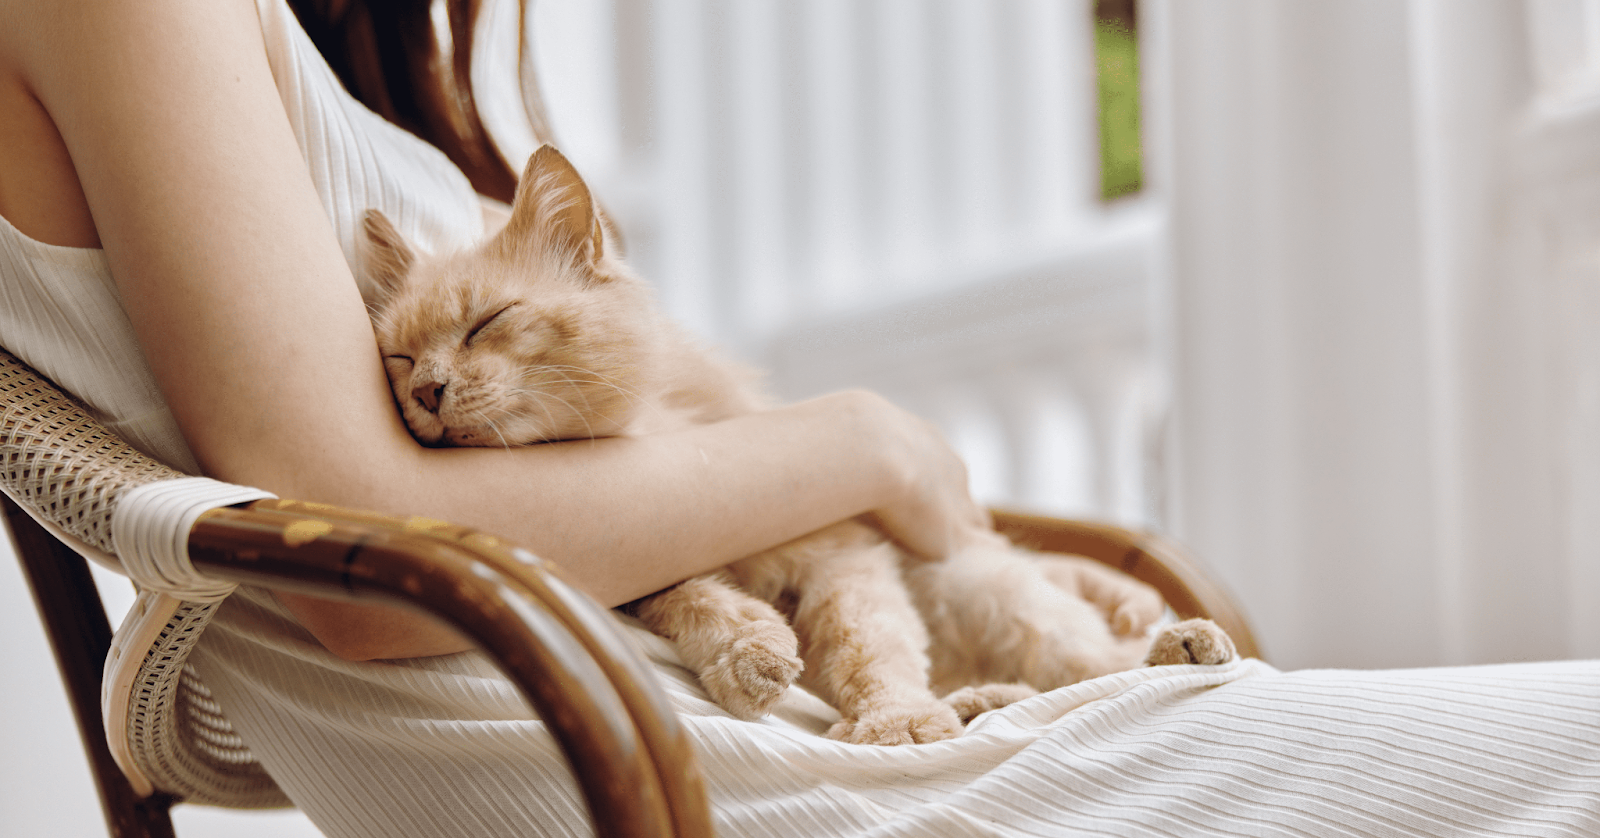 ginger cat asleep in woman's lap